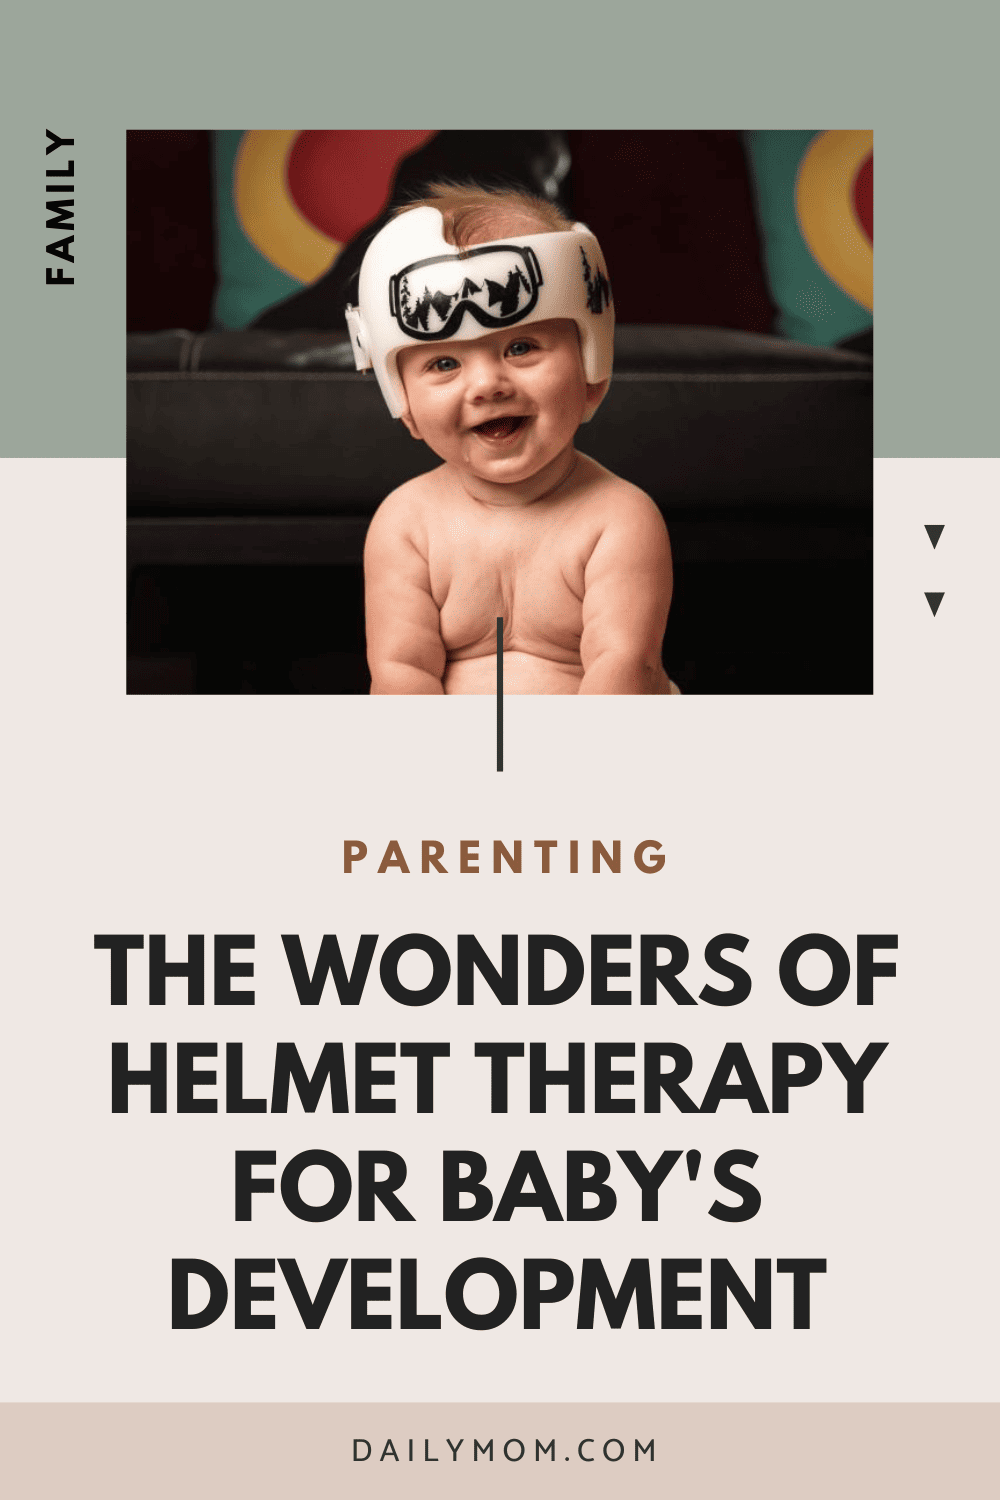 Daily Mom Parent Portal Helmet Therapy